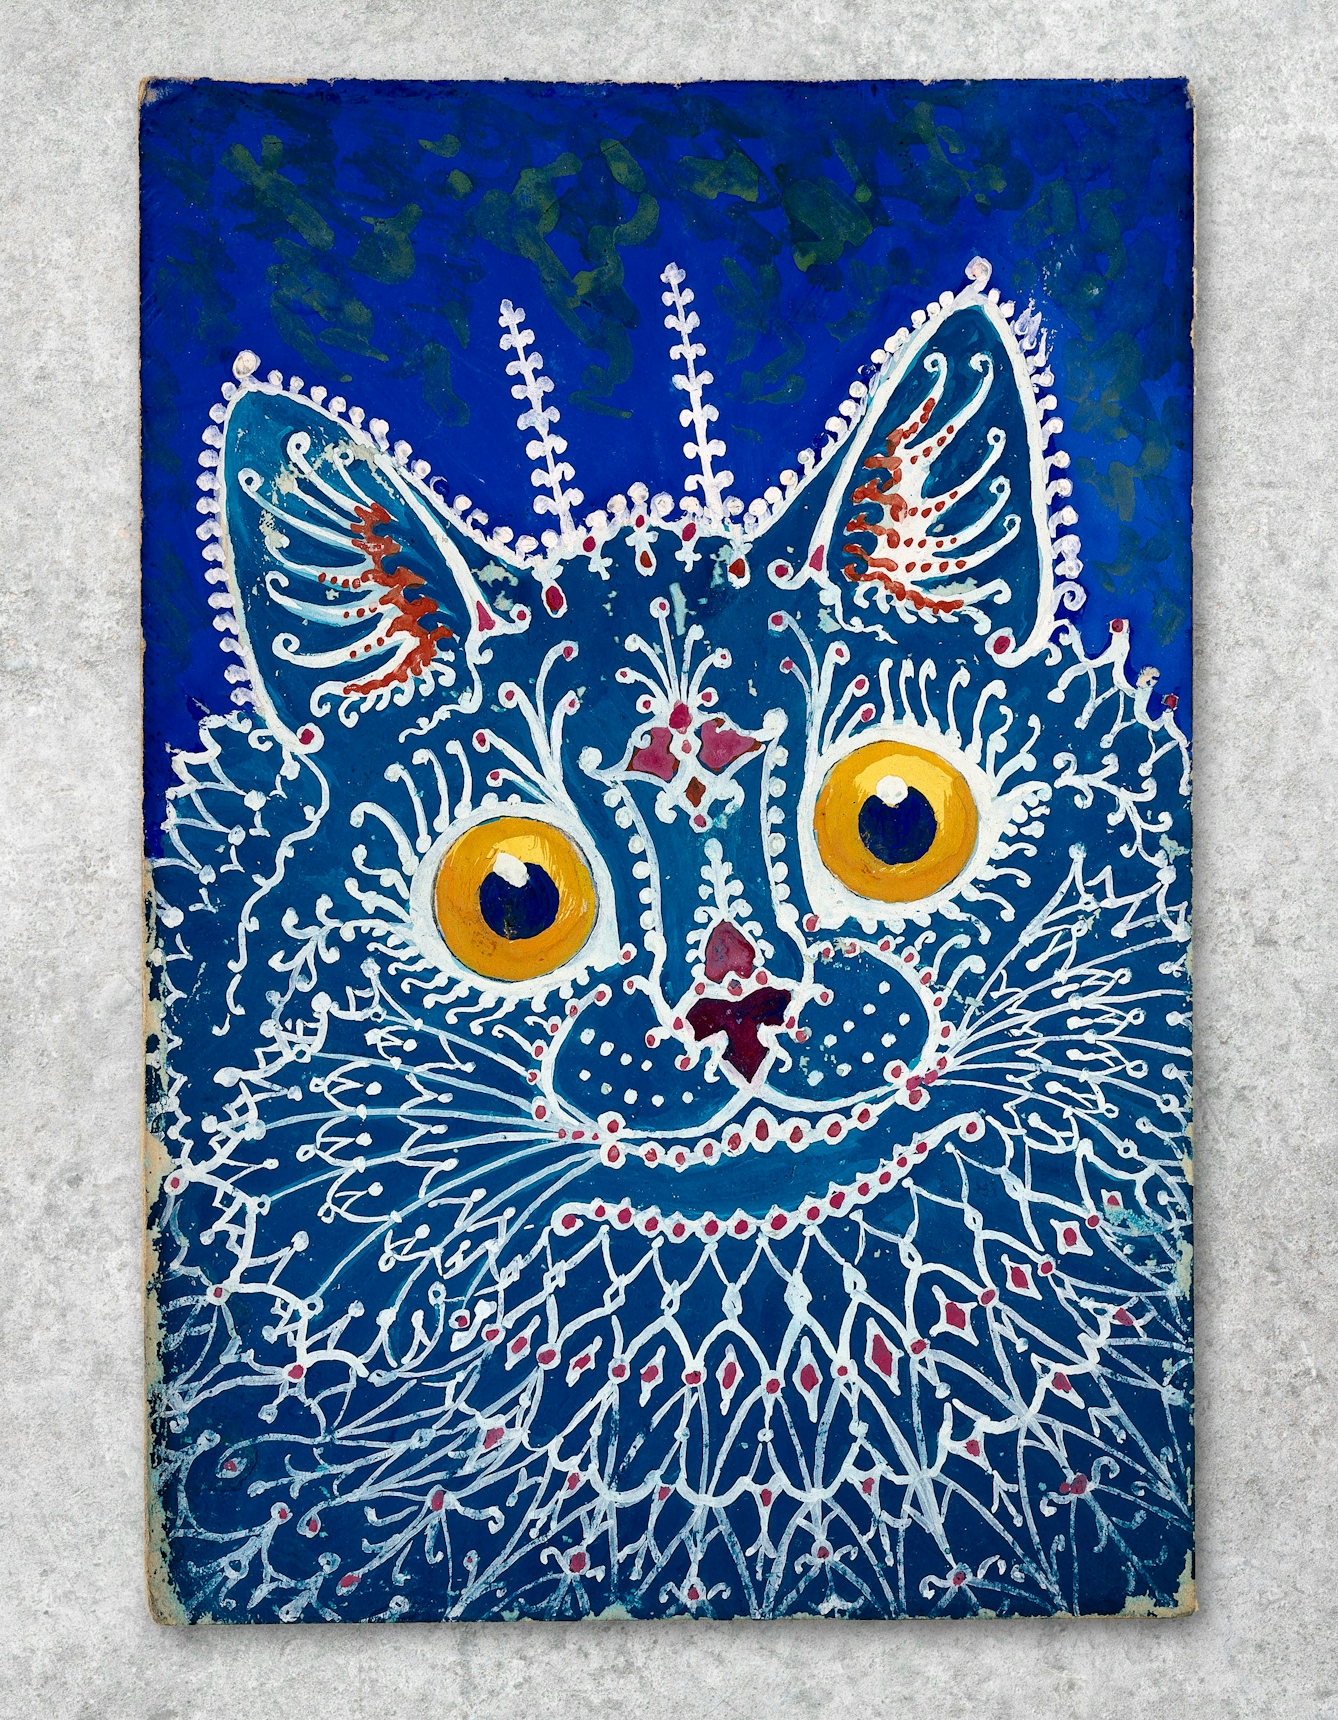 Photograph showing a work of art against a grey concrete textured background. The artwork shows colourful, abstract interpretation of a cat in tones of blue, white and yellow, by Louis Wain. On a blue ground, a turquoise cat, the patterns of its fur being formed by white lines resembling gothic tracery